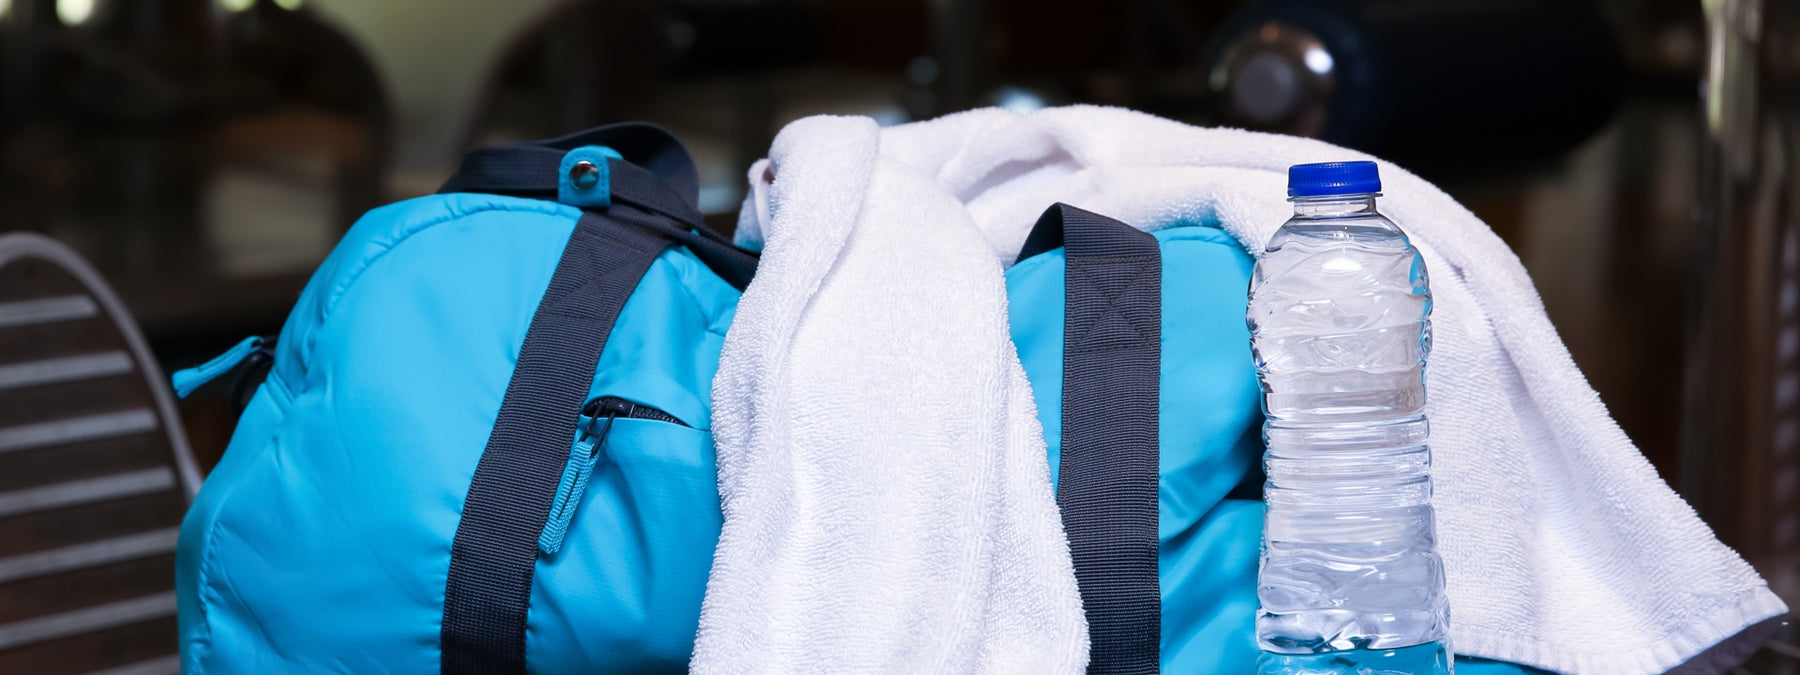 Name Something You Must Have in Your Gym Bag? (Poll)